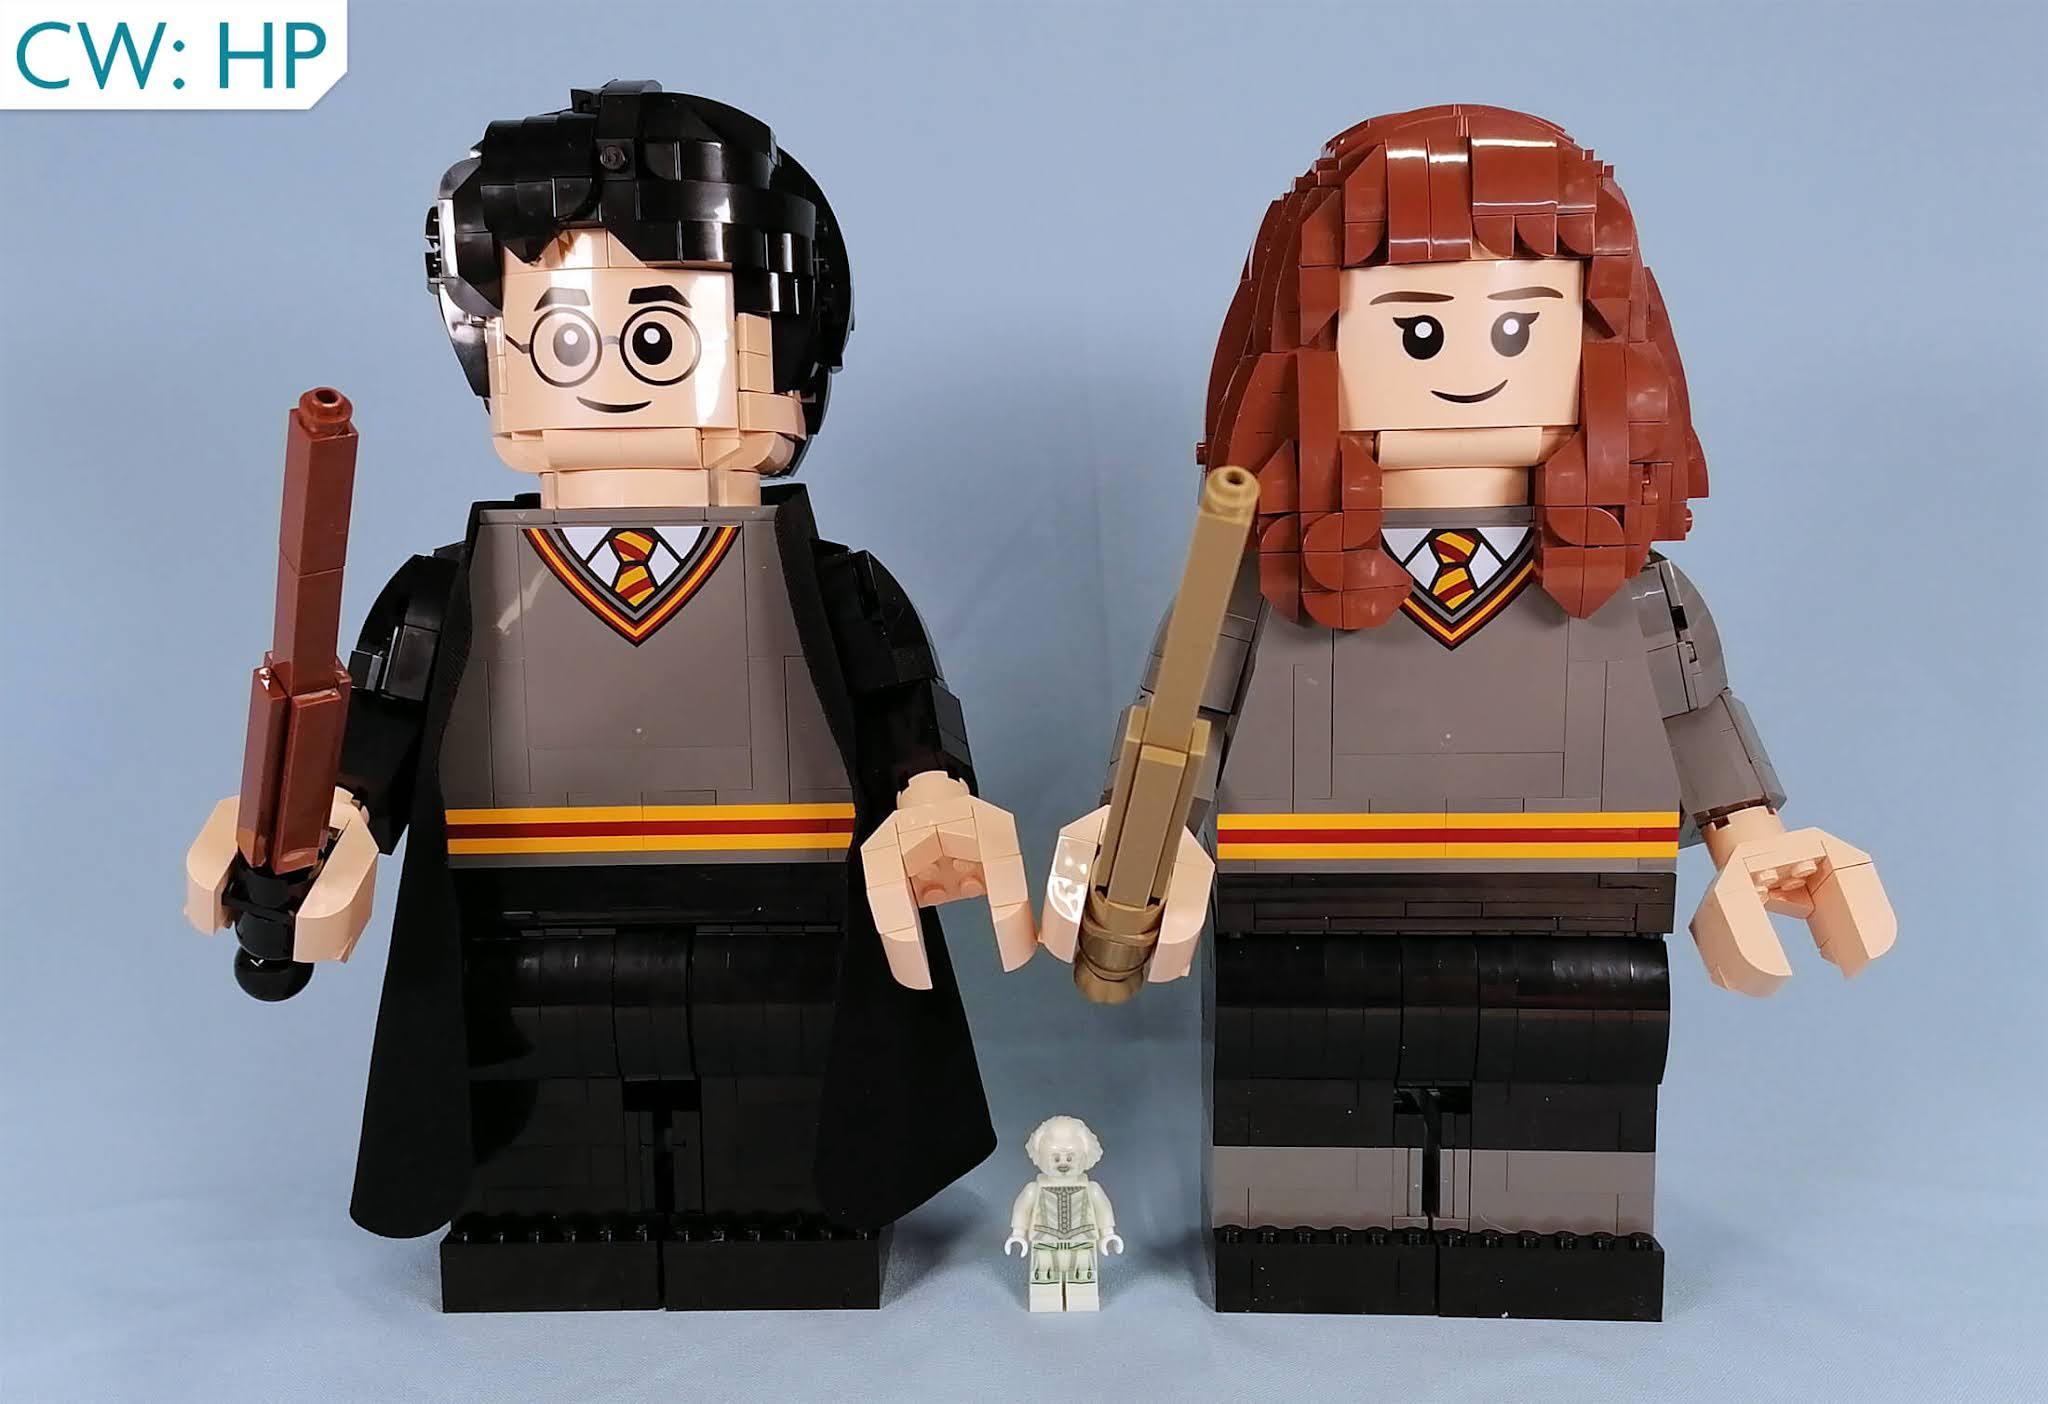 CW:HP) Build a giant minifigure with LEGO® 76393 Harry Potter & Hermione  Granger | New Elementary: LEGO® parts, sets and techniques